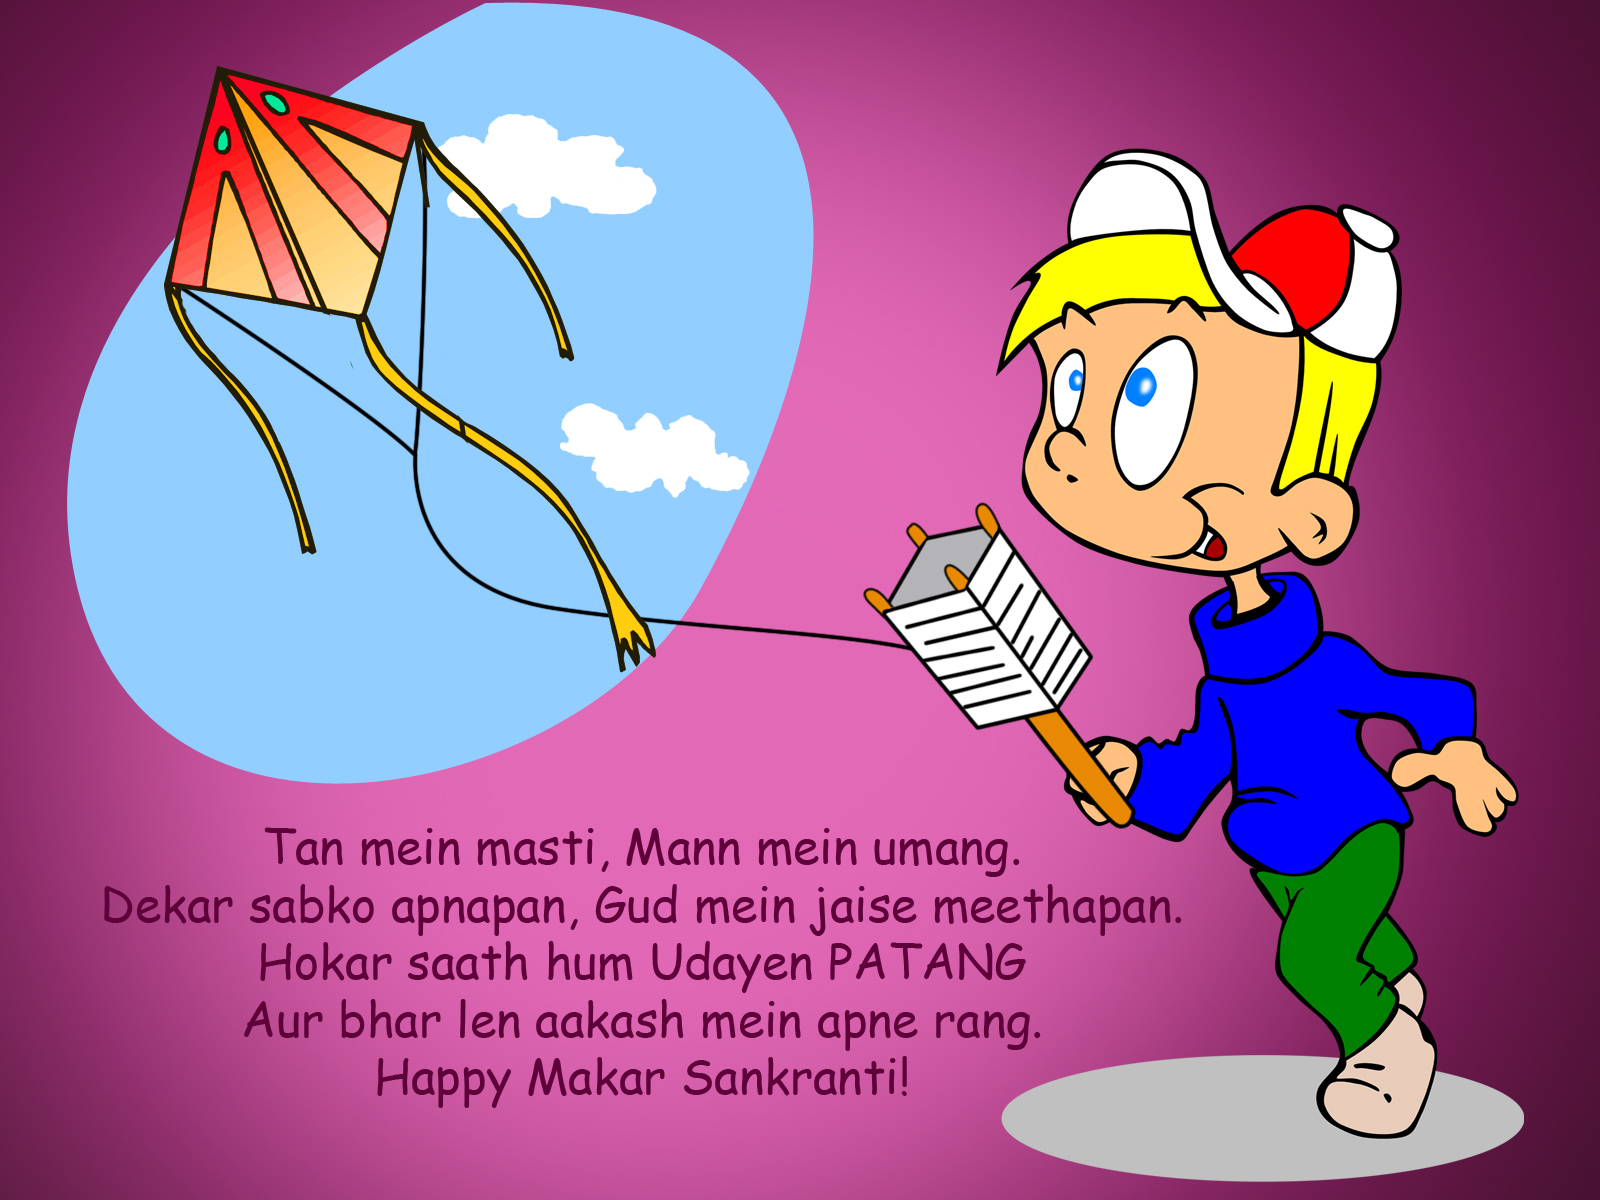 Makar Sankranti Wishes, Greetings and Quotes